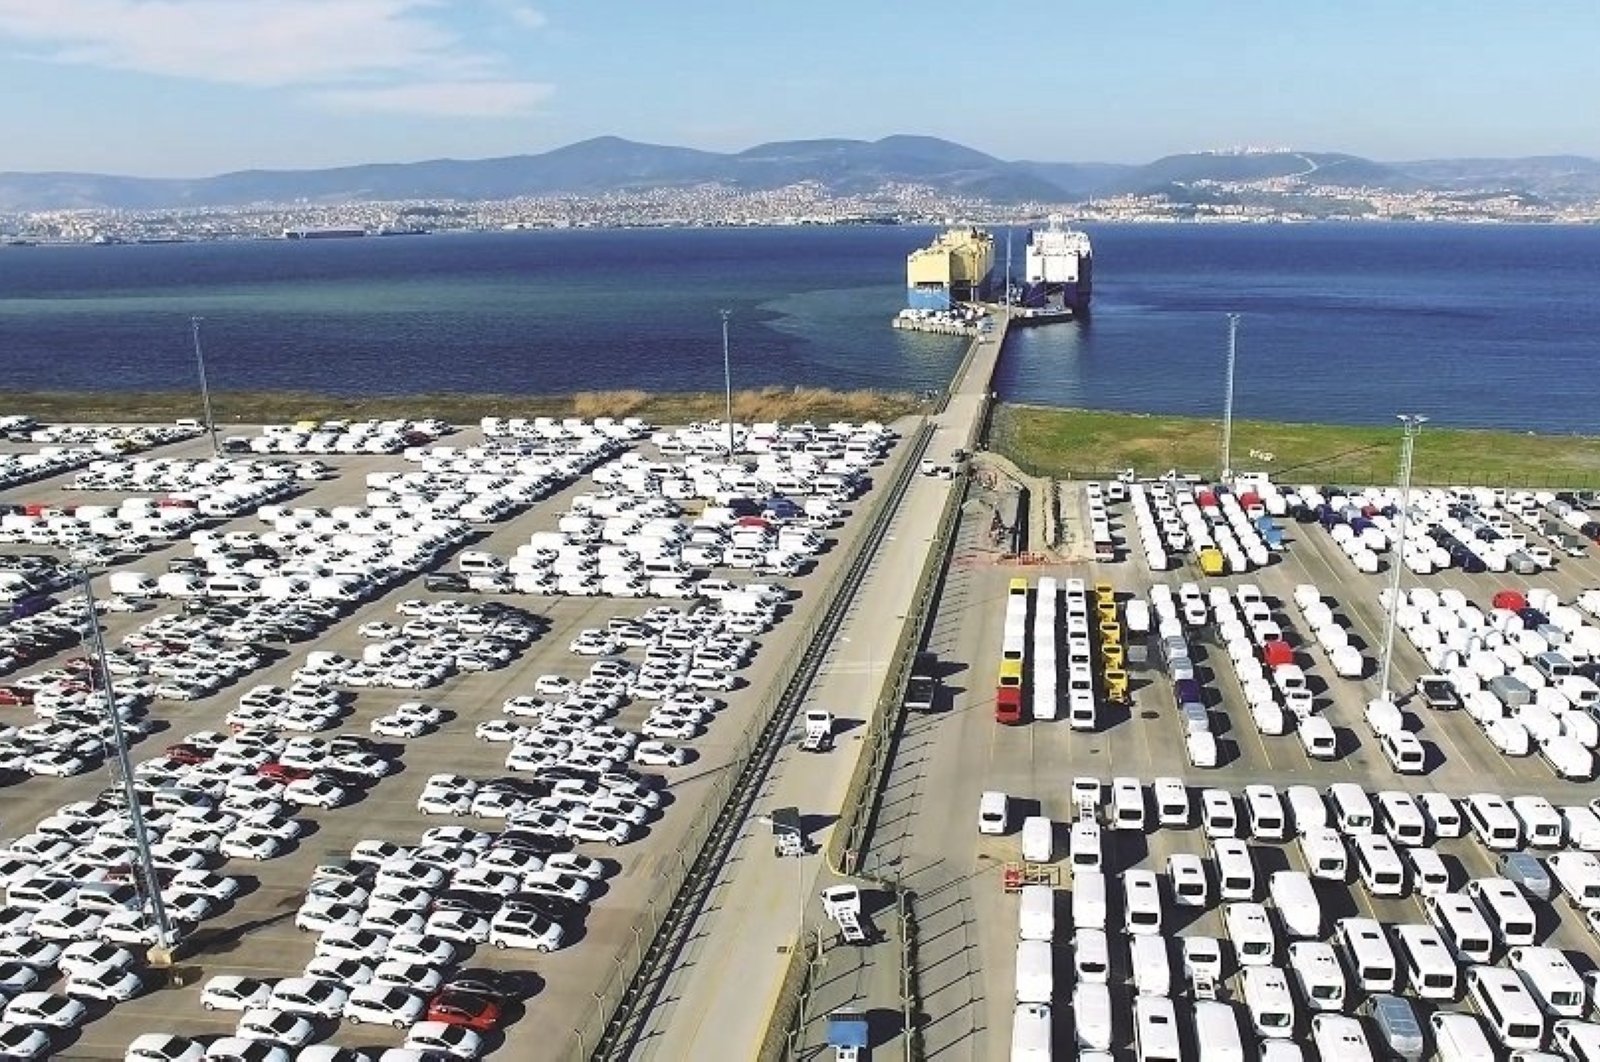 Turkey’s car subindustry will make above $11B exports in 2021